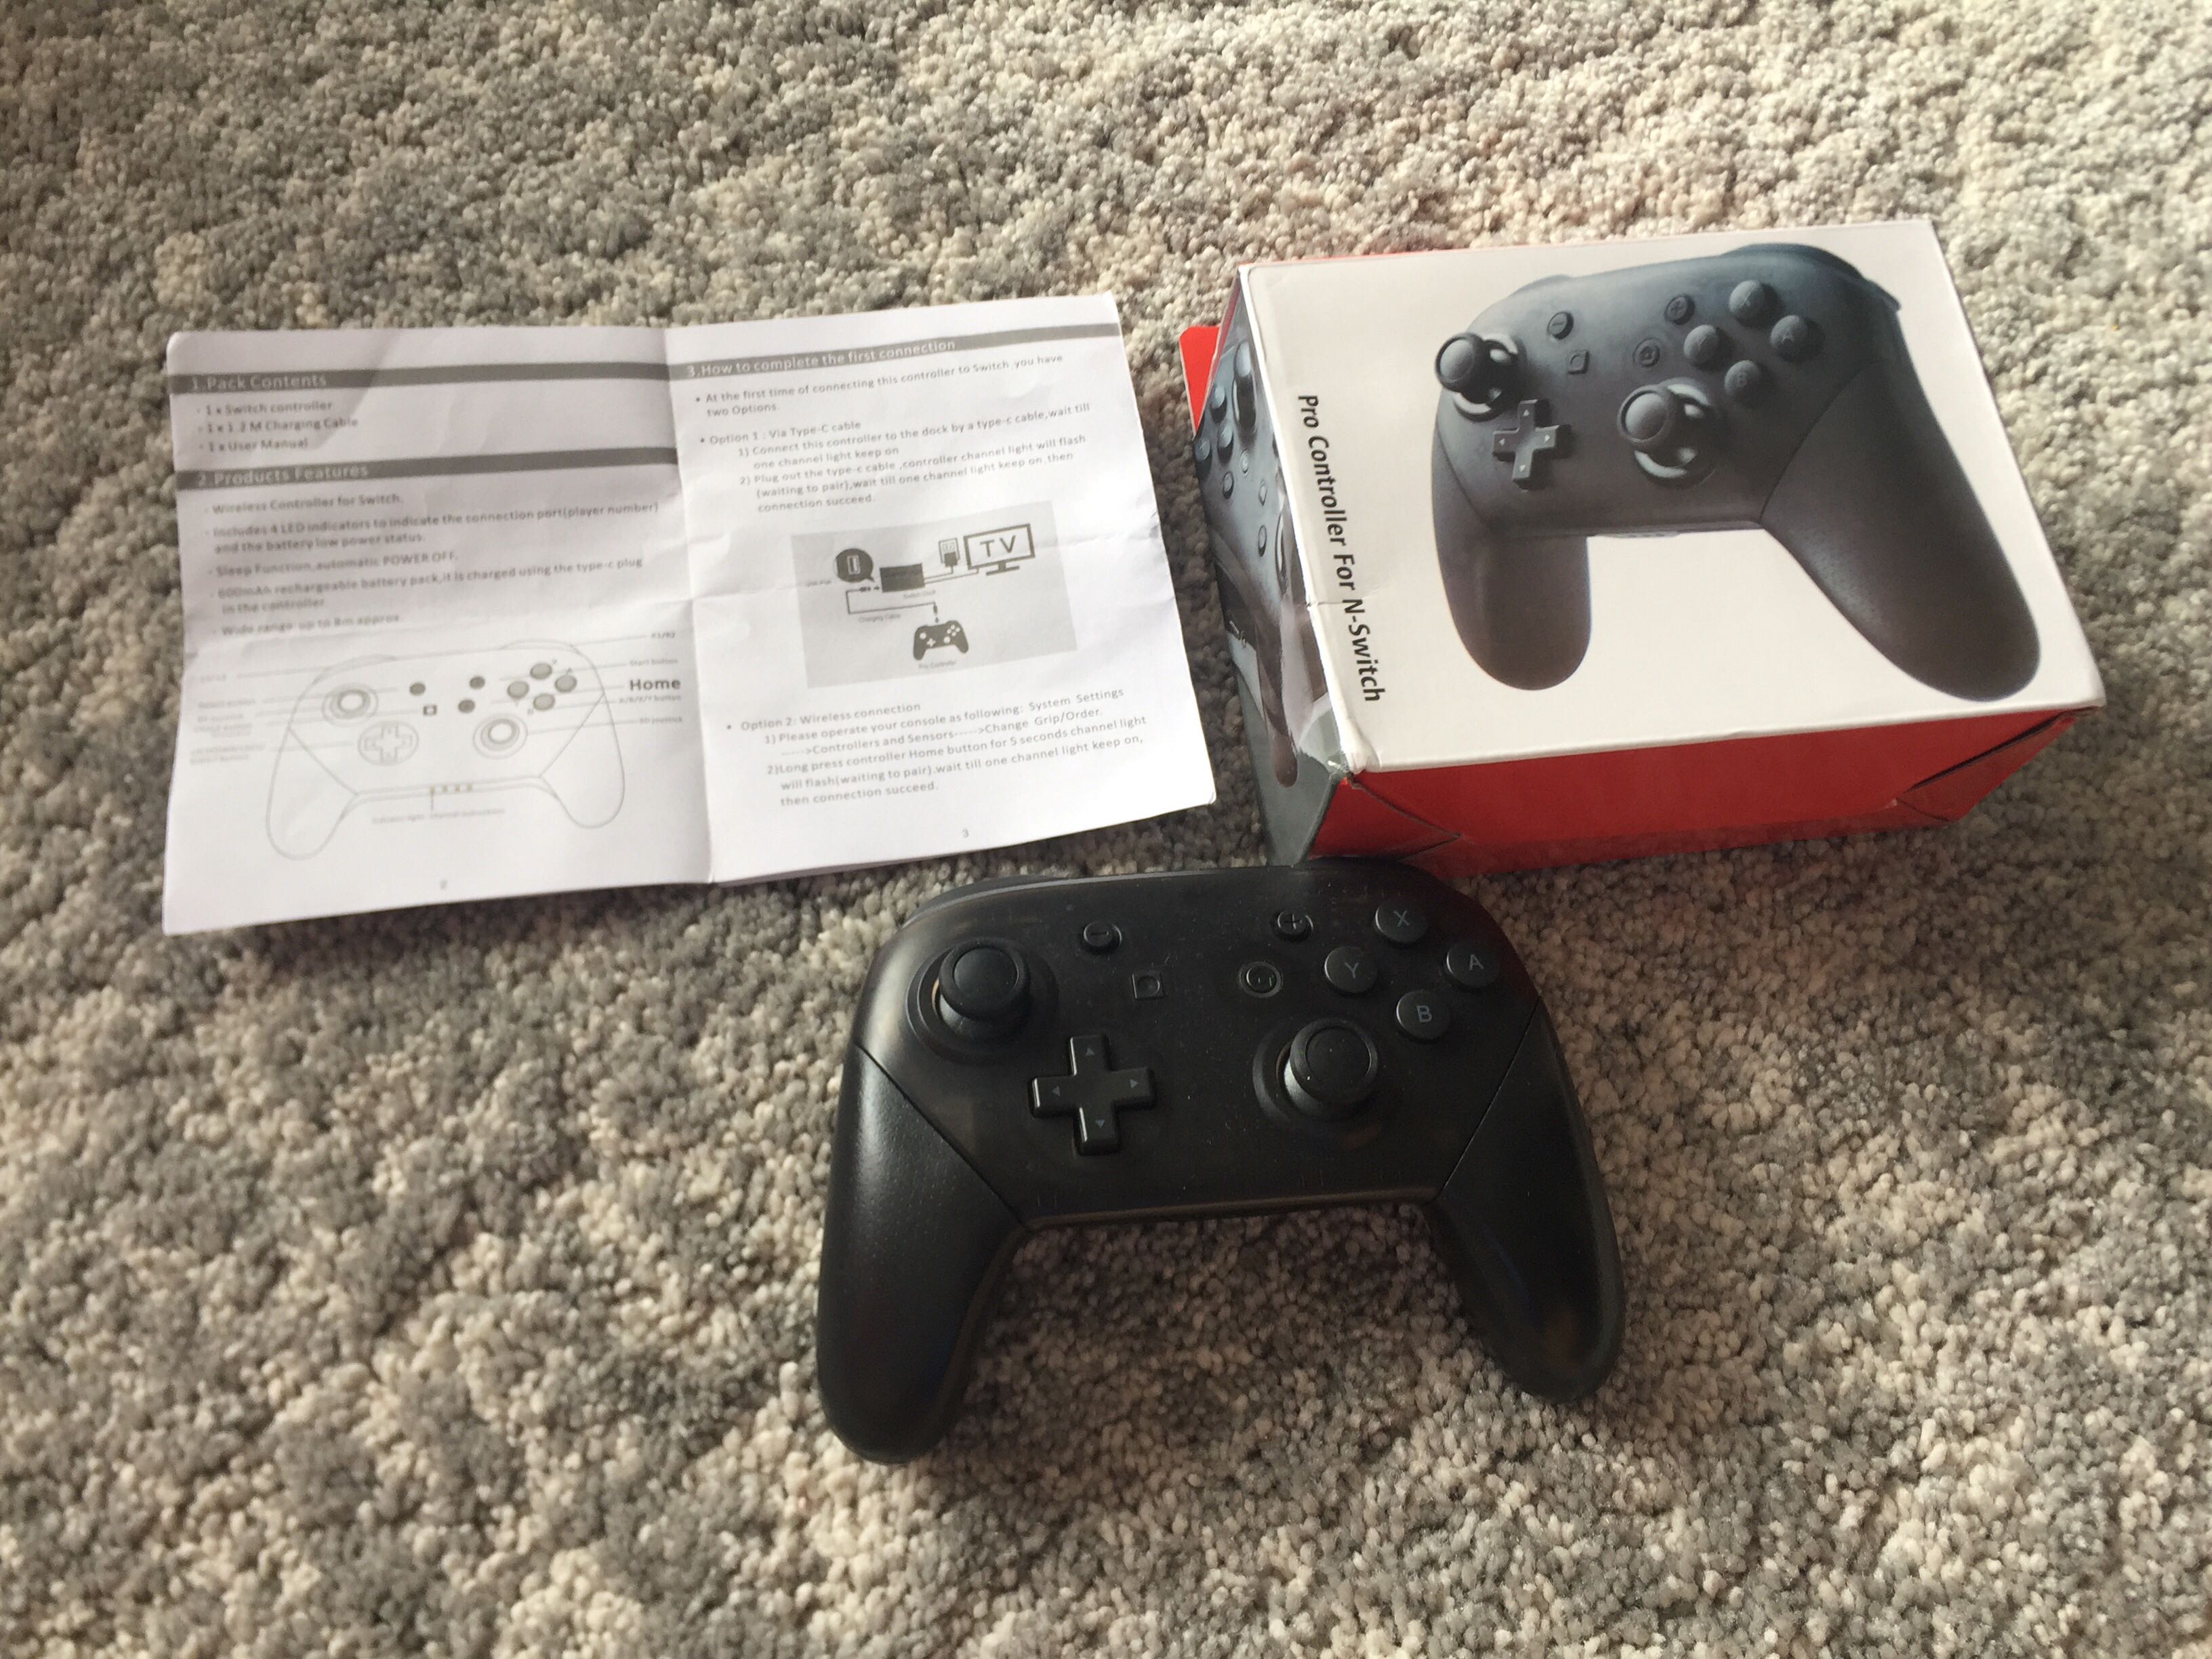 third party switch pro controller